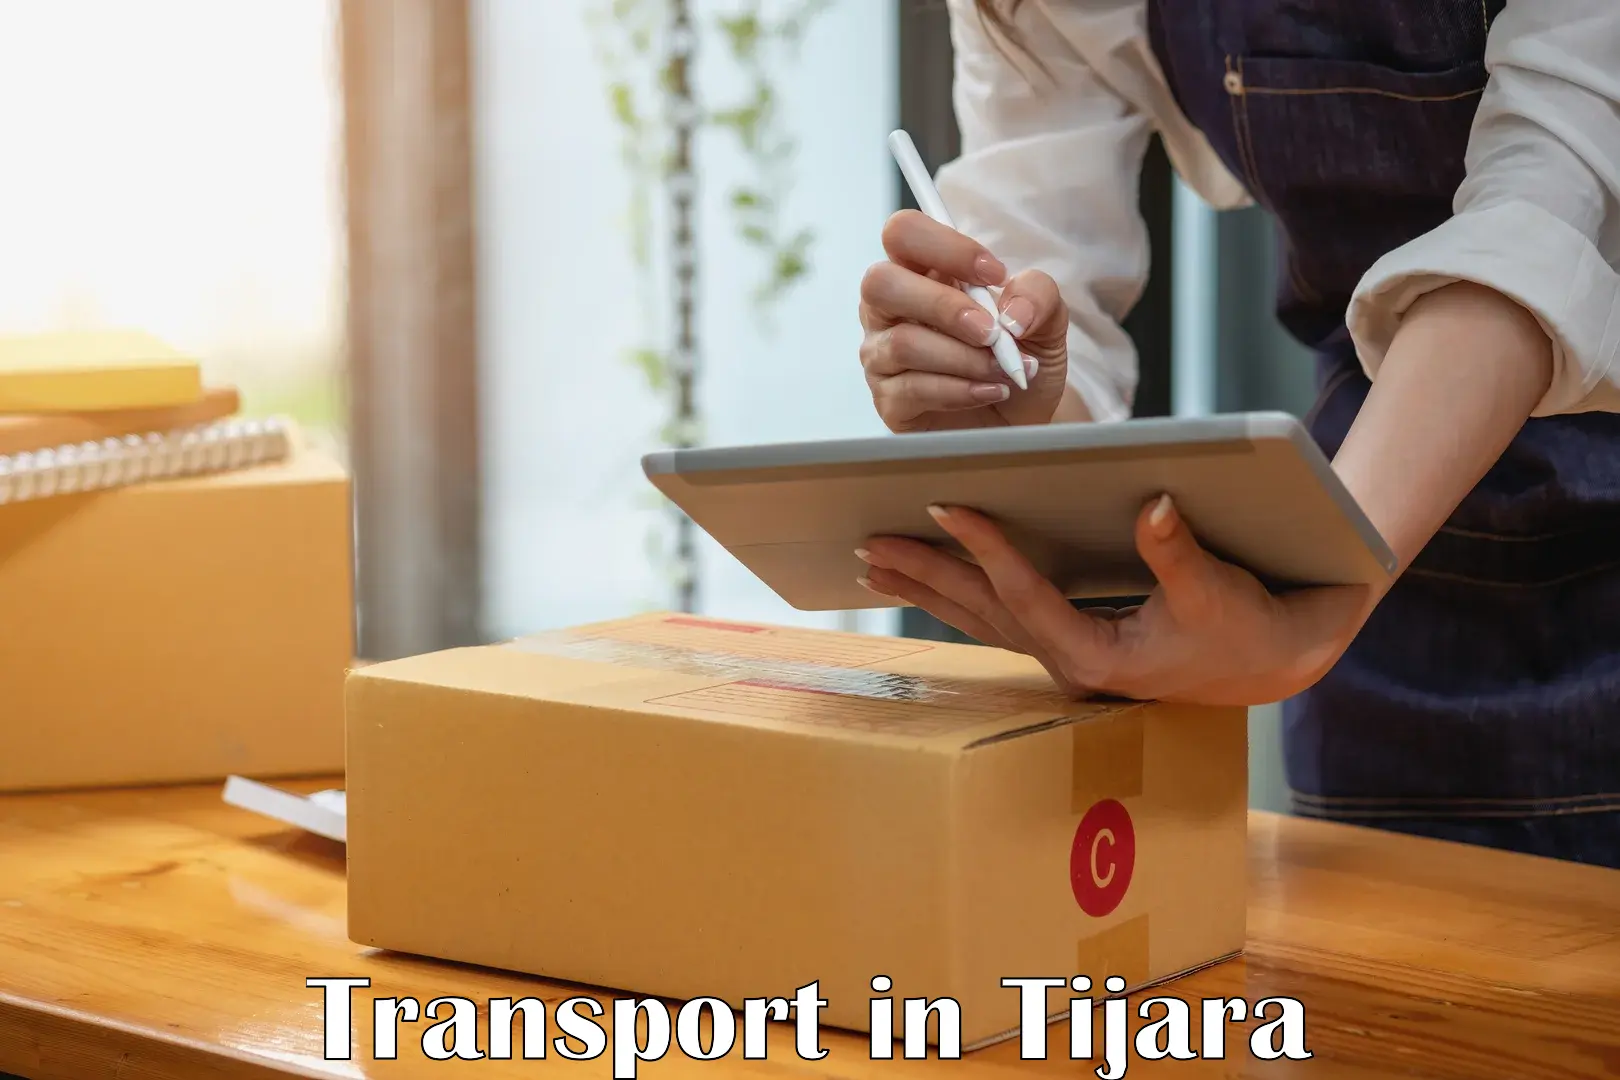 Air freight transport services in Tijara